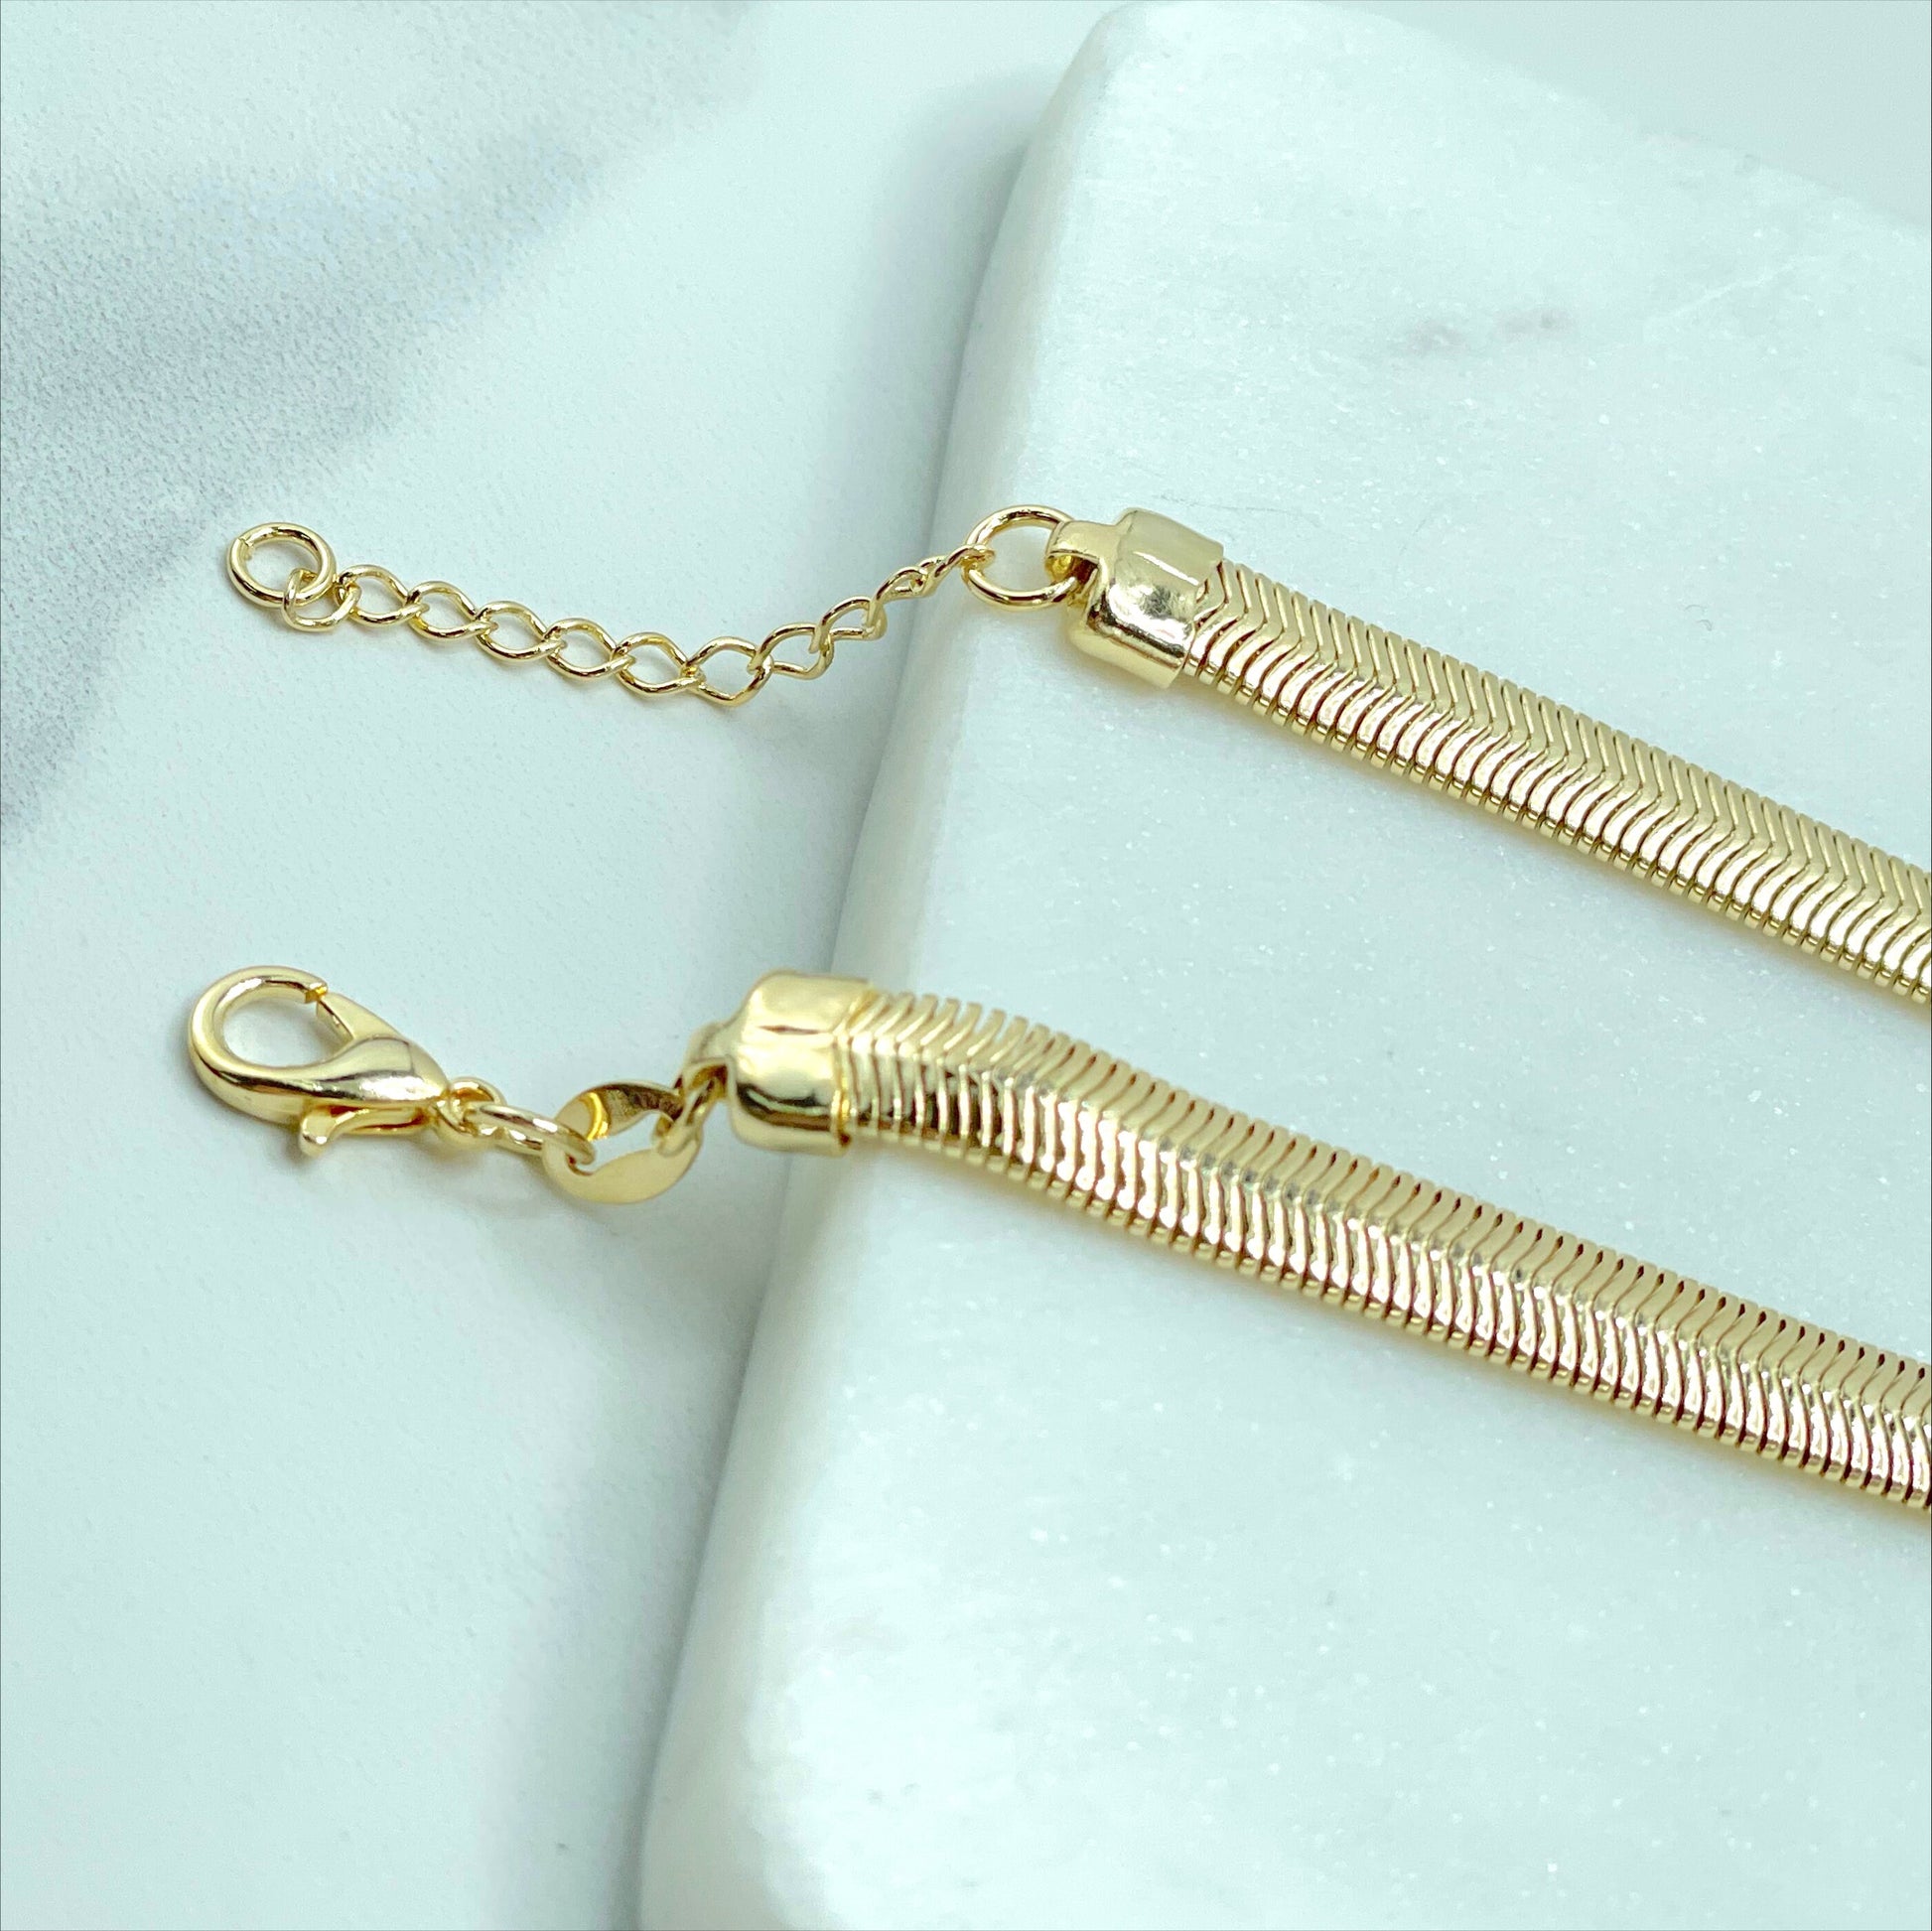 18k Gold Filled Fancy 5 mm Snake Herringbone Chain 16'' or 18'' with Extender, 7.5'' to 8.5''Bracelet Set, Wholesale Jewelry Making Supplies